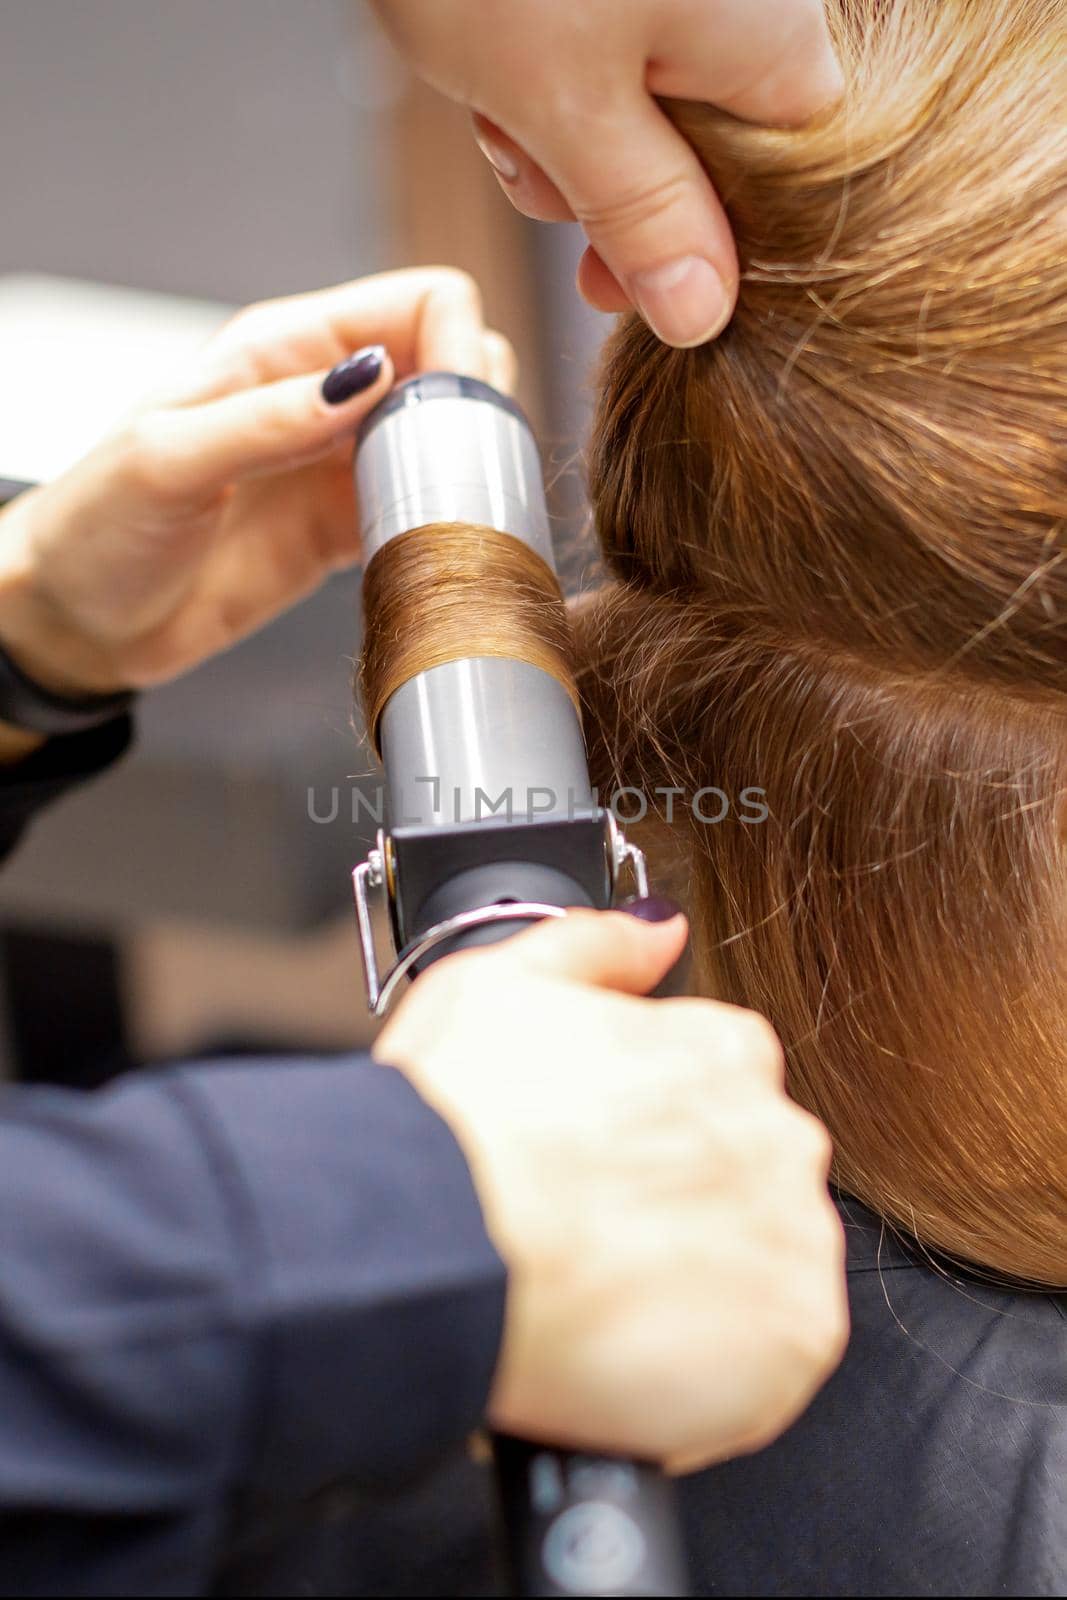 Hands of female hairstylist curls hair client with a curling iron in a hairdressing salon, close up. by okskukuruza